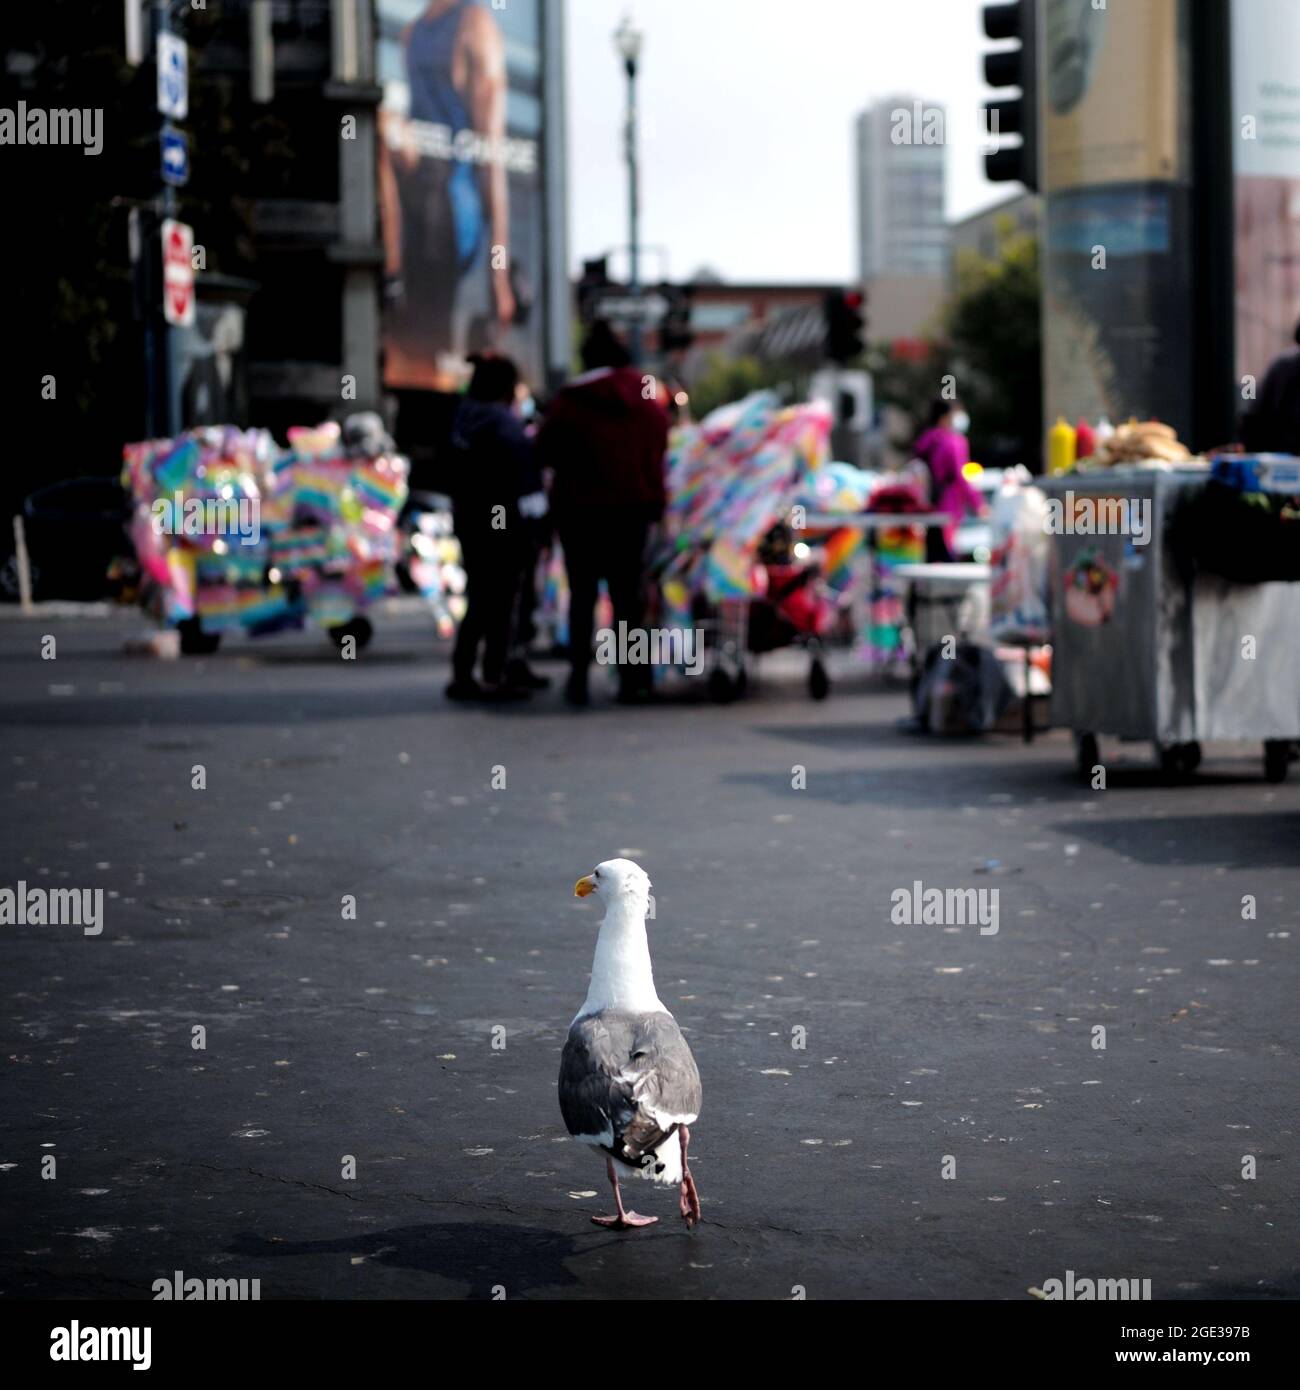 (210816) -- SAN FRANCISCO, Aug. 16, 2021 (Xinhua) -- A seagull wanders on a street in San Francisco, the United States, on Aug. 15, 2021. San Francisco Mayor London Breed announced last Thursday that the city will require businesses in certain high-contact indoor sectors to obtain proof of vaccination from their patrons and employees for them to go inside those facilities. The health order requirement for proof of full vaccination for patrons of indoor public settings, including bars, restaurants, clubs and gyms goes into effect on Aug. 20. To preserve jobs while giving time for compliance, Stock Photo